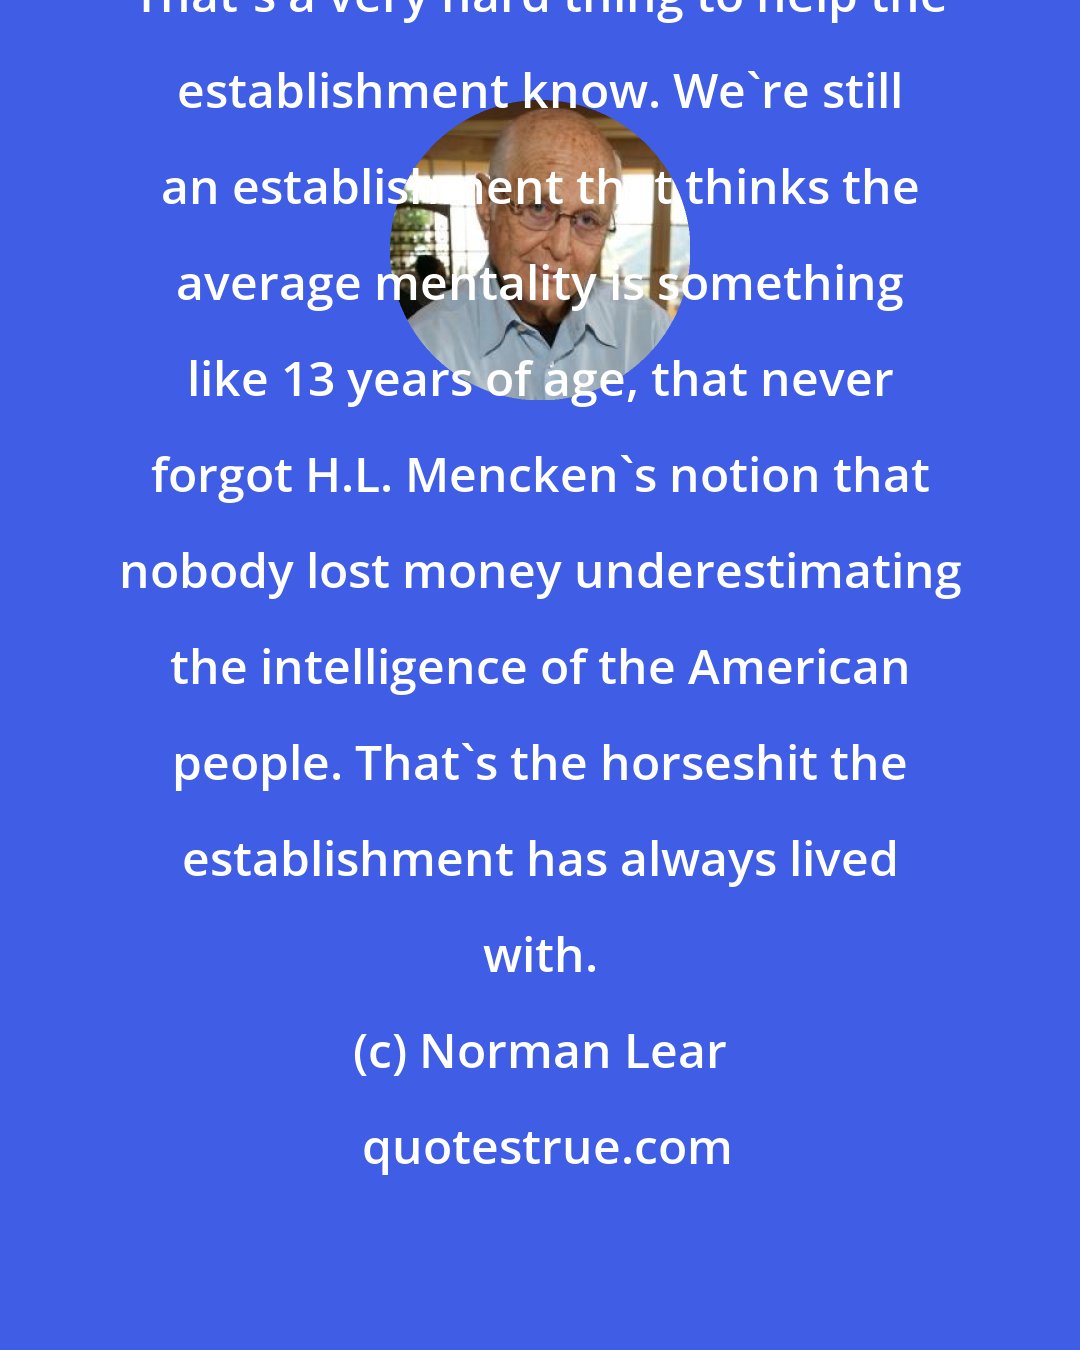 Norman Lear: That's a very hard thing to help the establishment know. We're still an establishment that thinks the average mentality is something like 13 years of age, that never forgot H.L. Mencken's notion that nobody lost money underestimating the intelligence of the American people. That's the horseshit the establishment has always lived with.